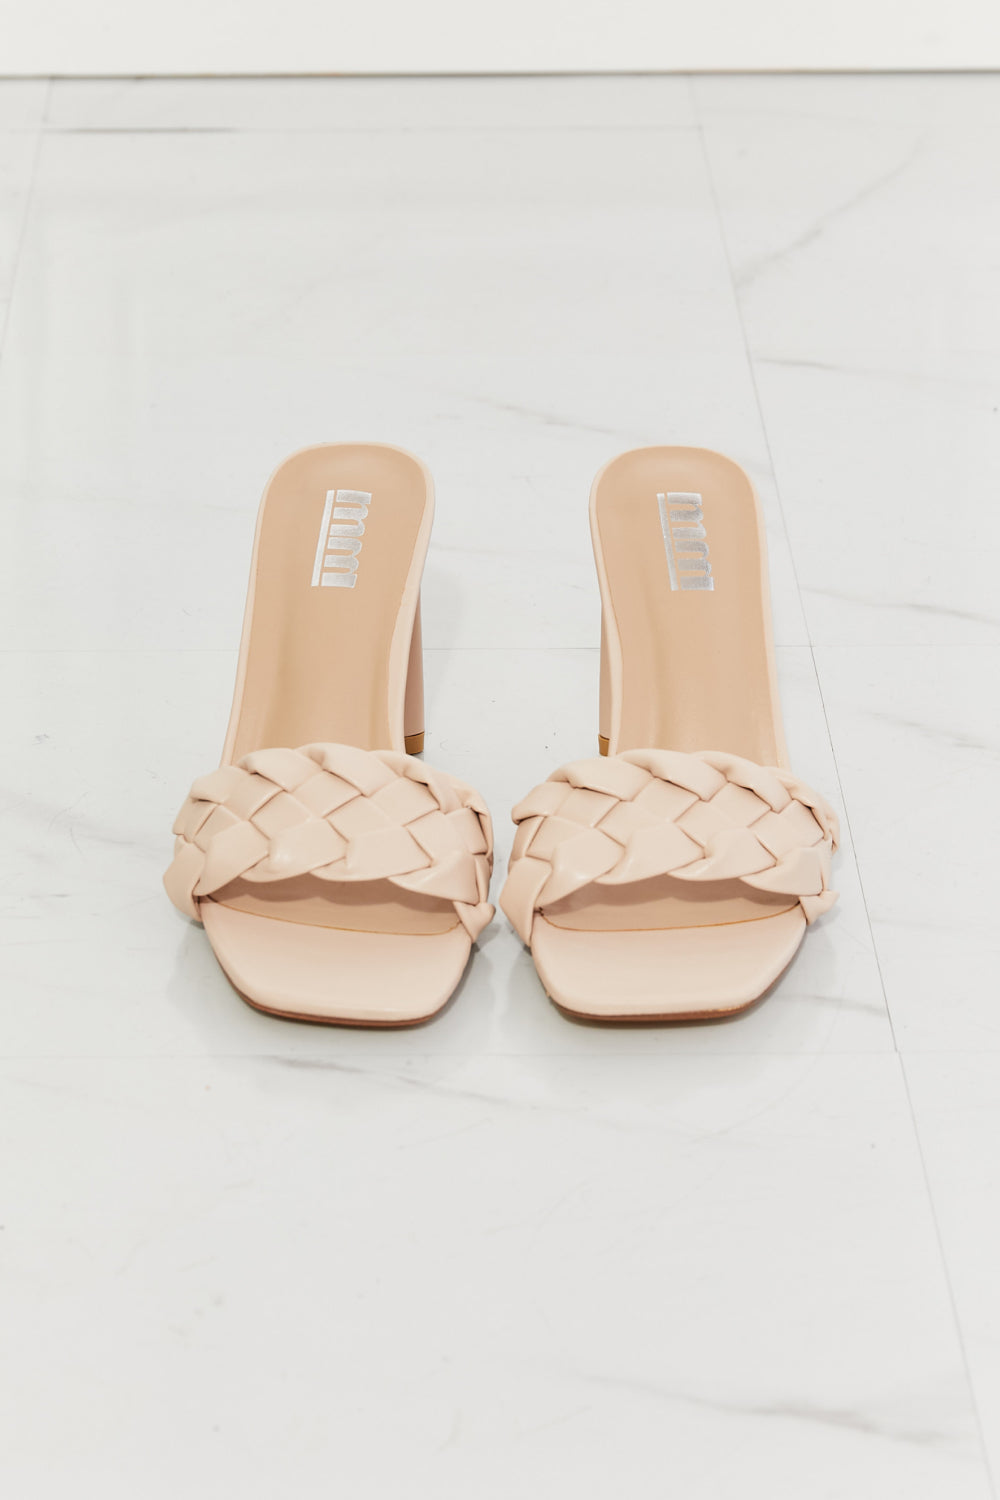 MMShoes Top of the World Braided Block Heel Sandals in Beige - AllIn Computer